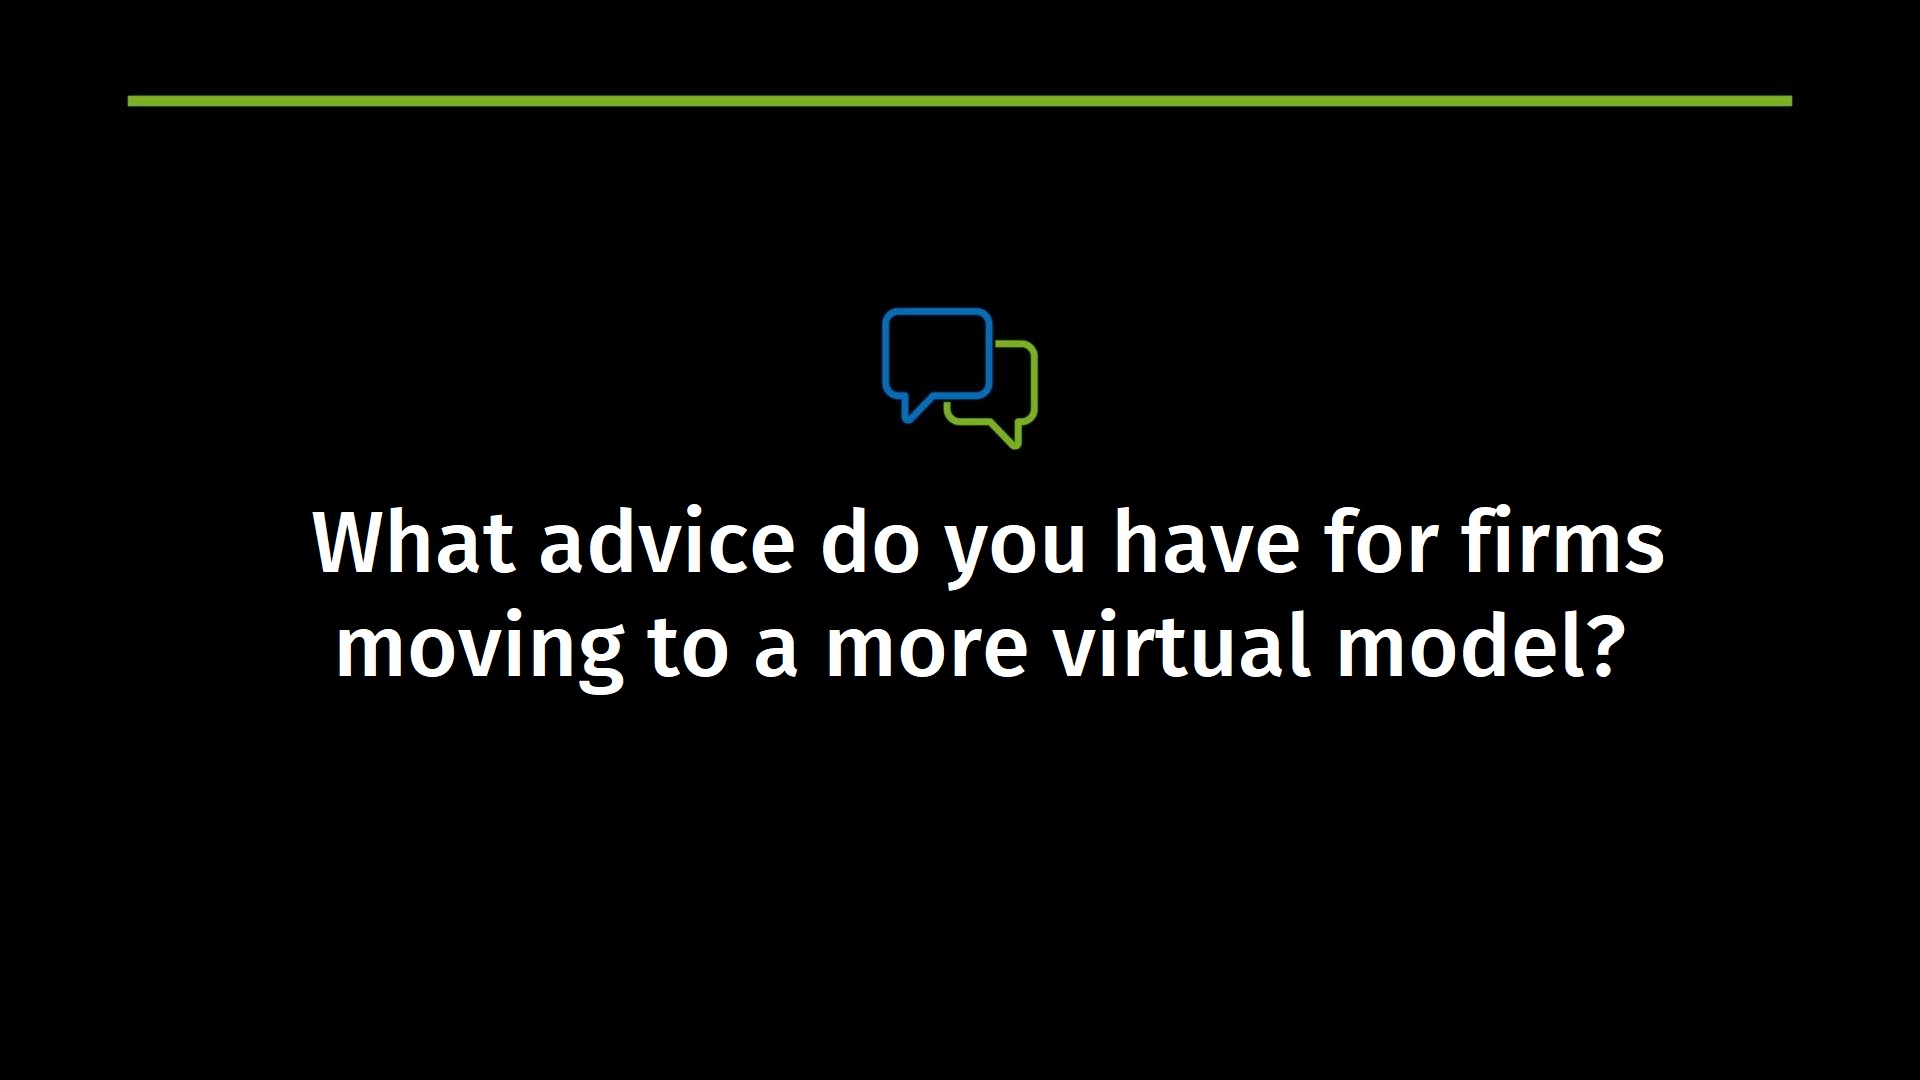 What advice do you have for firms moving to a more virtual model?